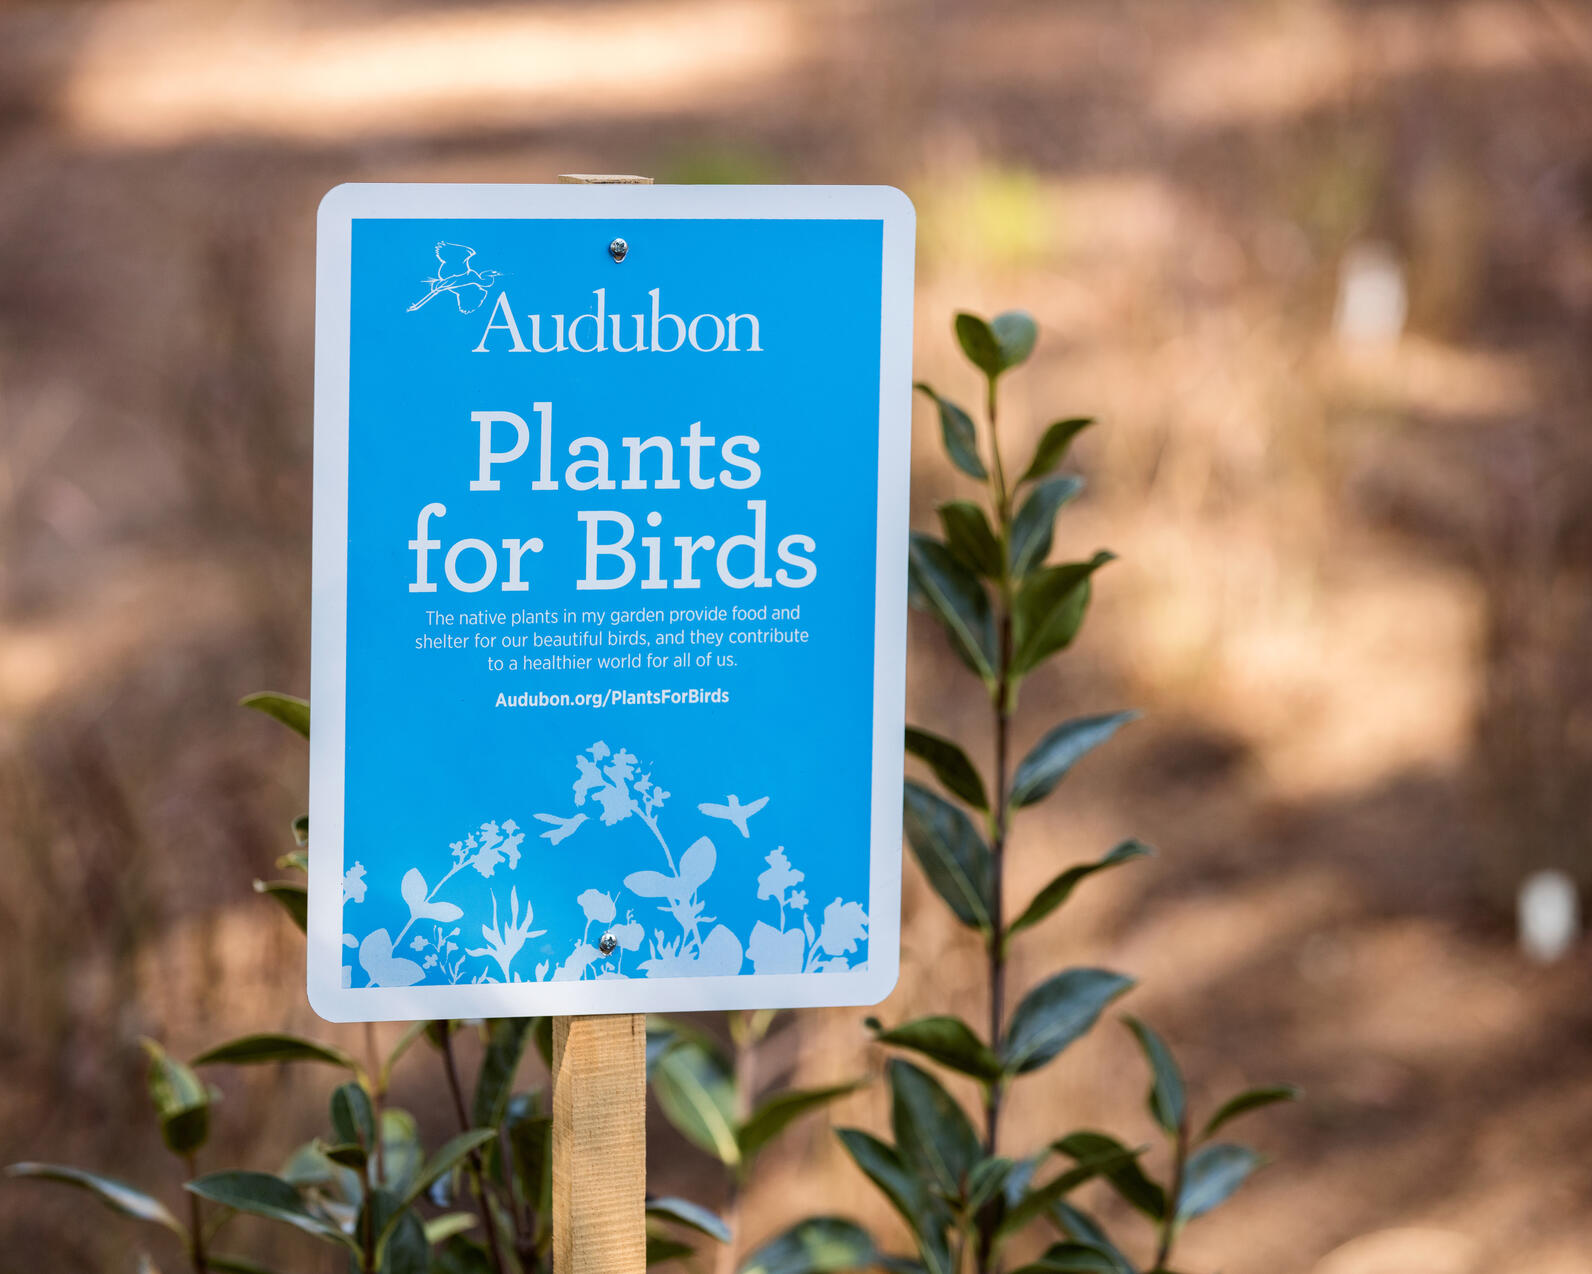 An Audubon Plants for Birds sign in front of a vine